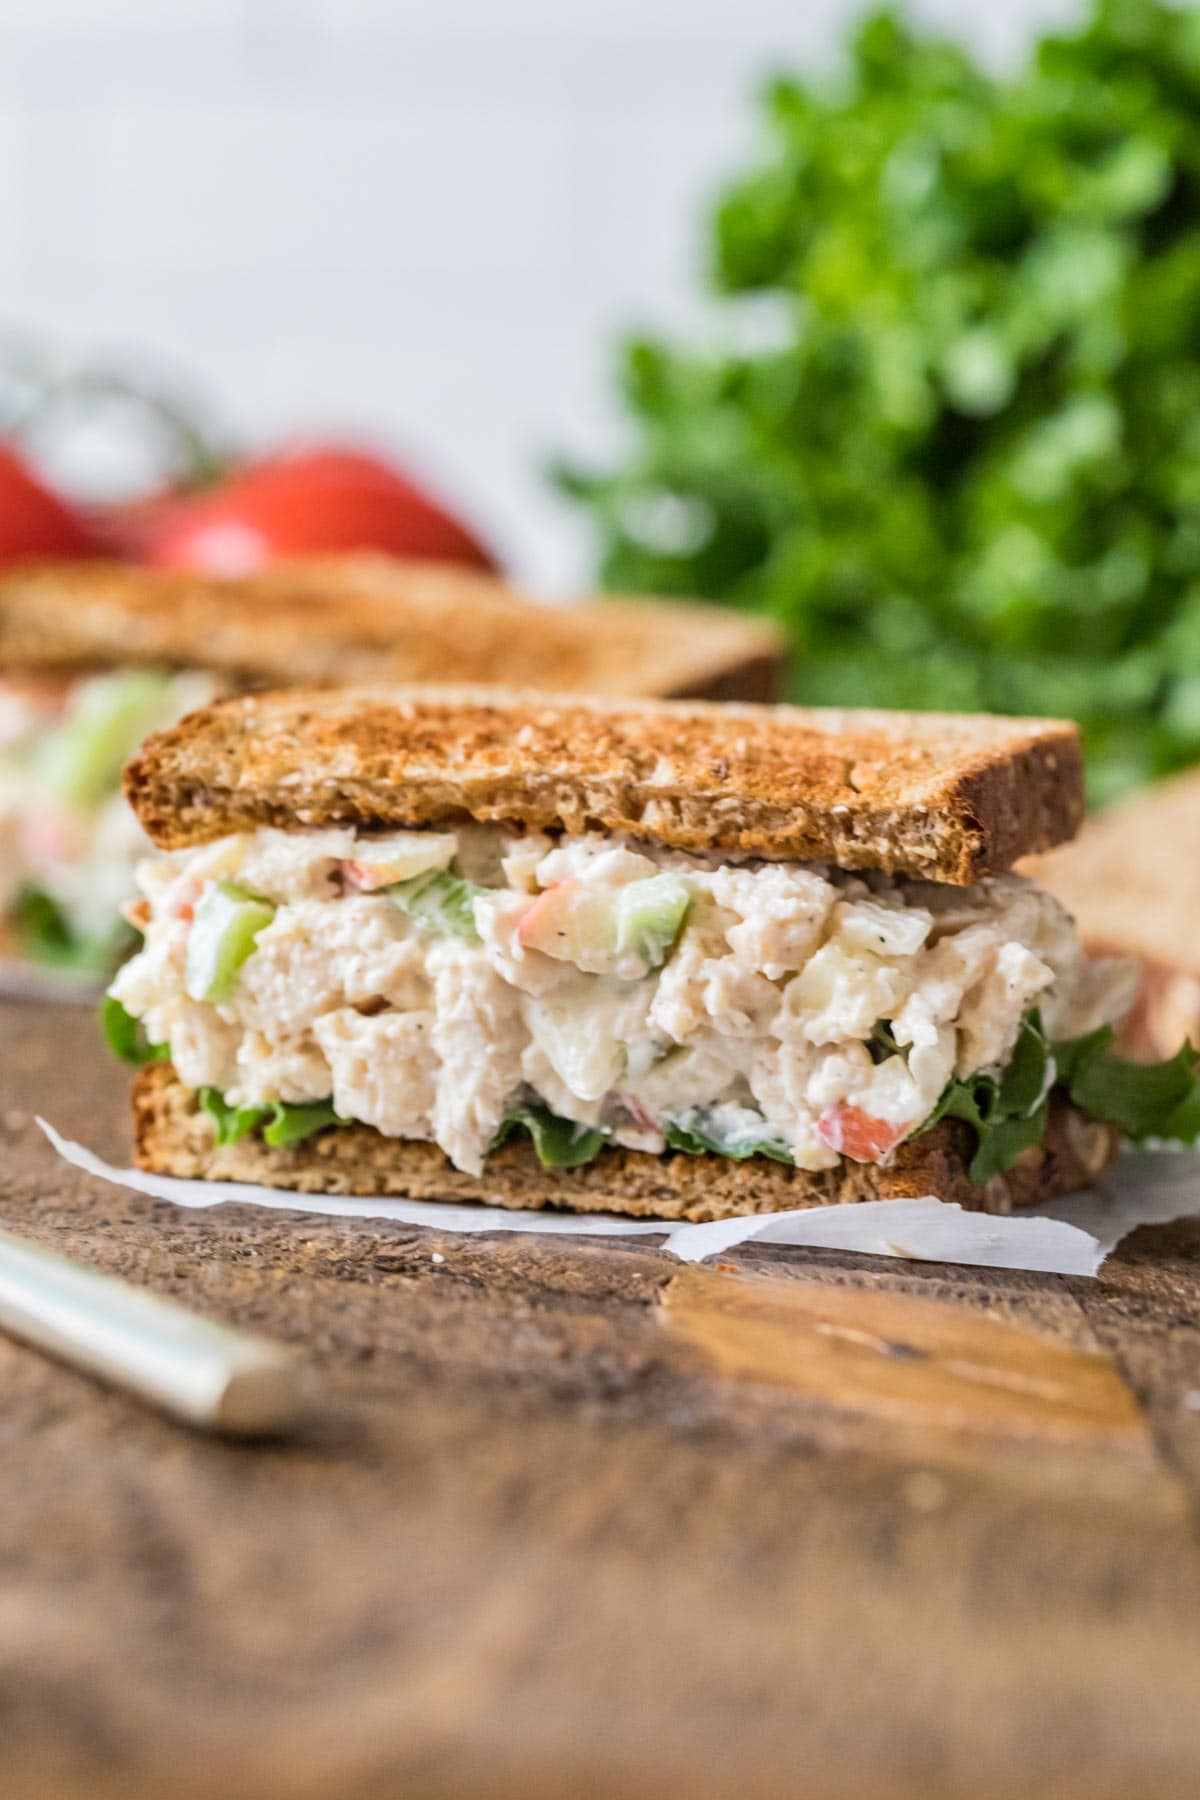 Salad made with chicken, mayo, apples, and more served on toasted wheat bread.